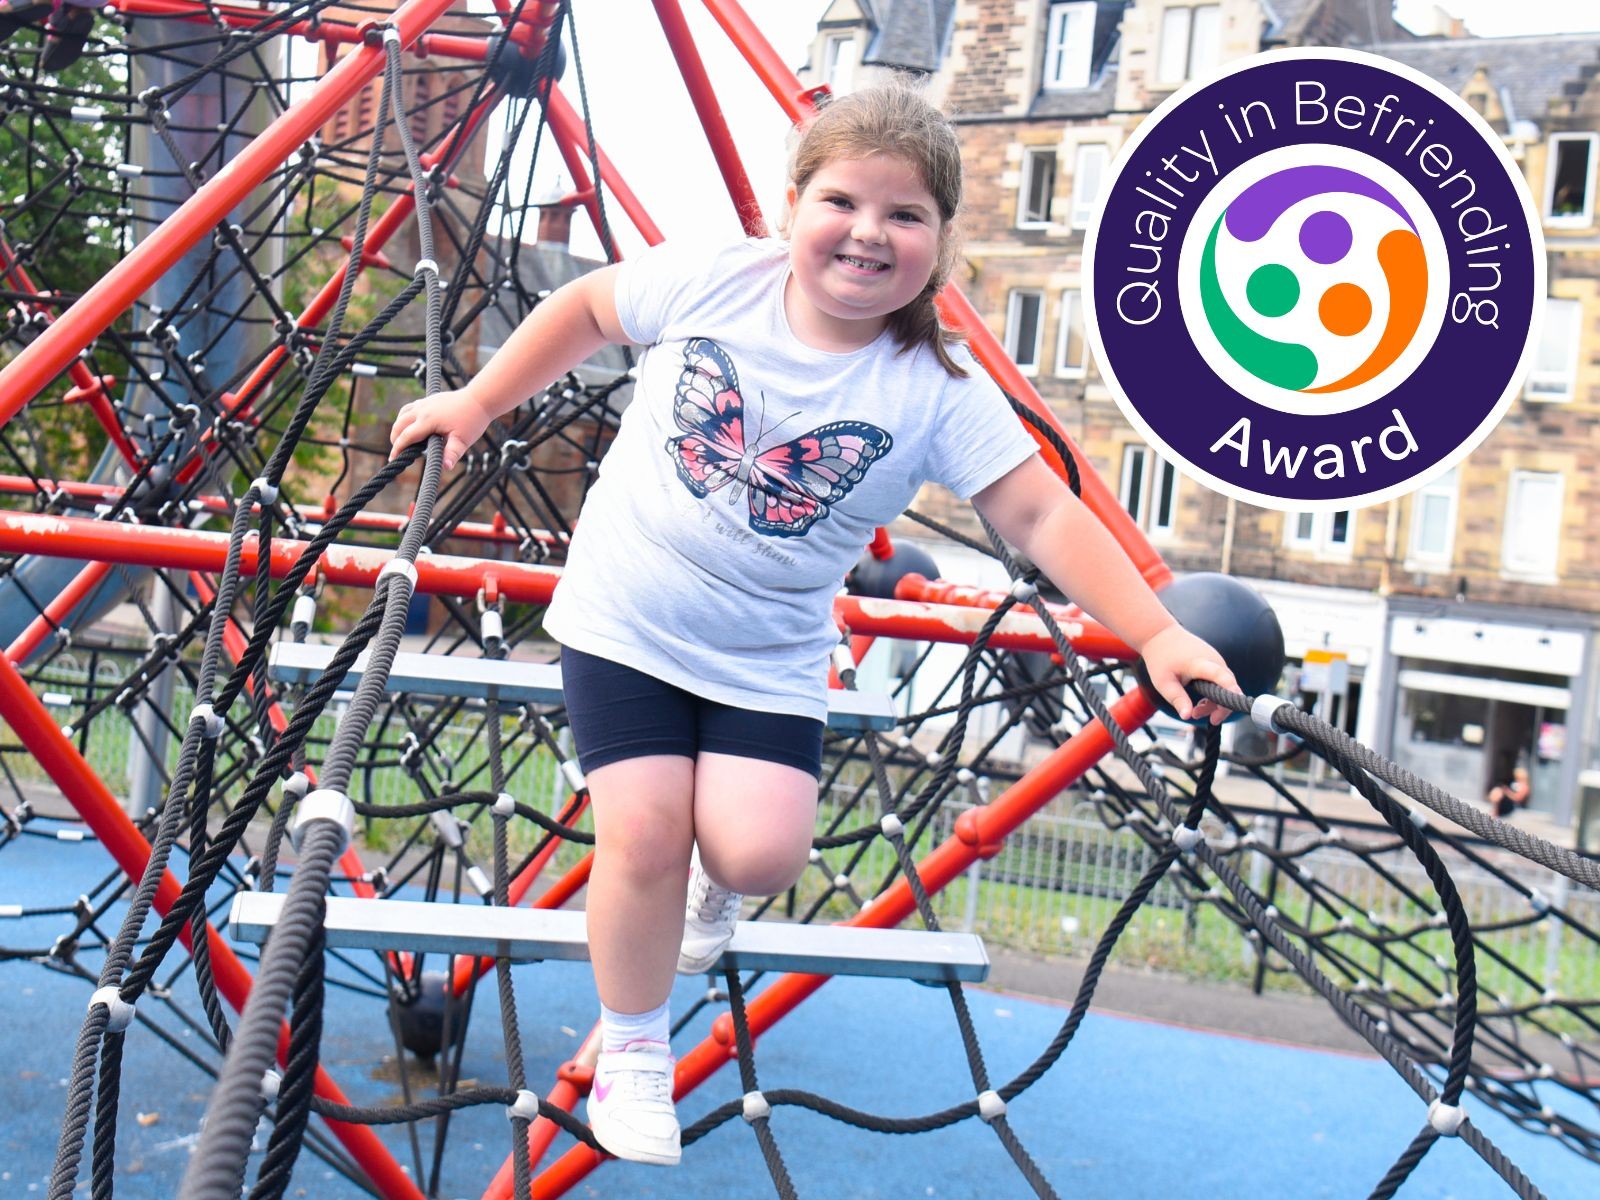  » Big Hearts: Achieves the Quality in Befriending Award